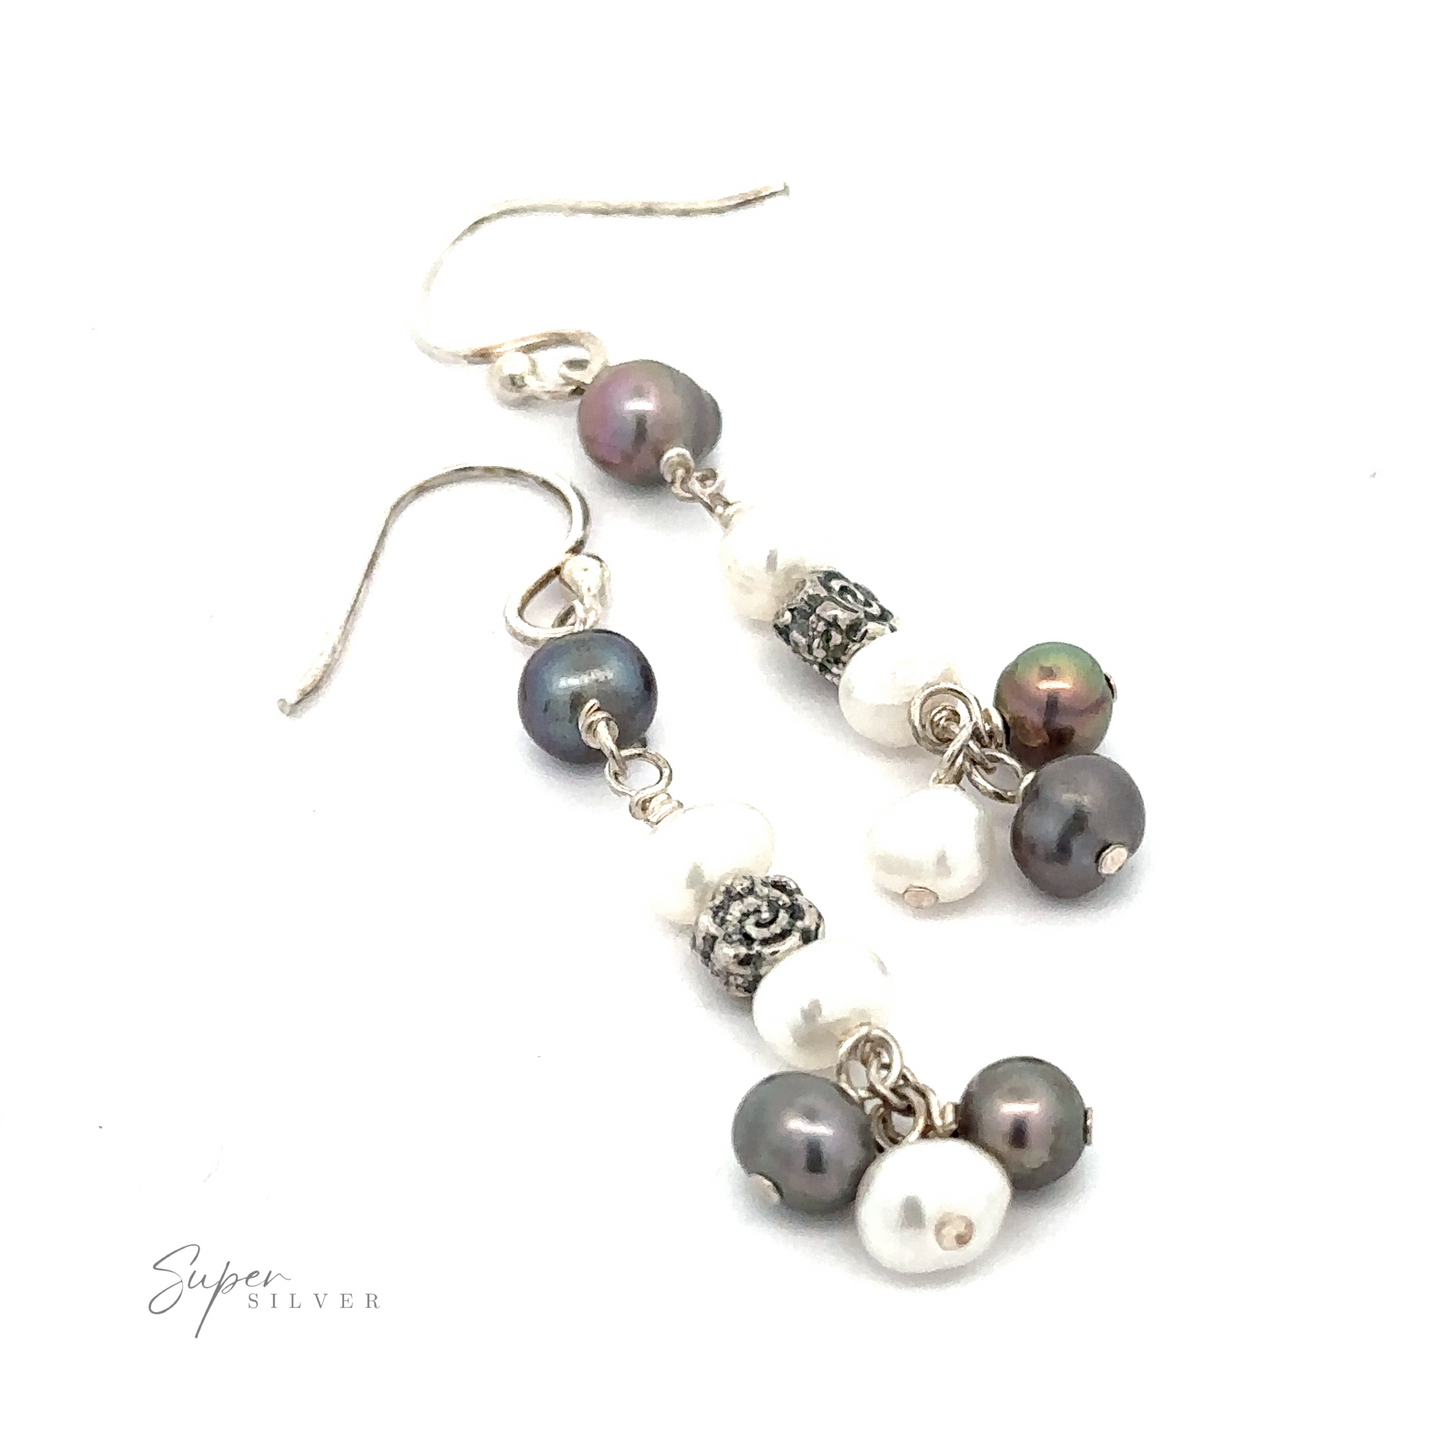 
                  
                    A pair of Floral Pearl Bead Earrings featuring a mix of white, black, and gray pearls, along with intricate silver bead accents.
                  
                